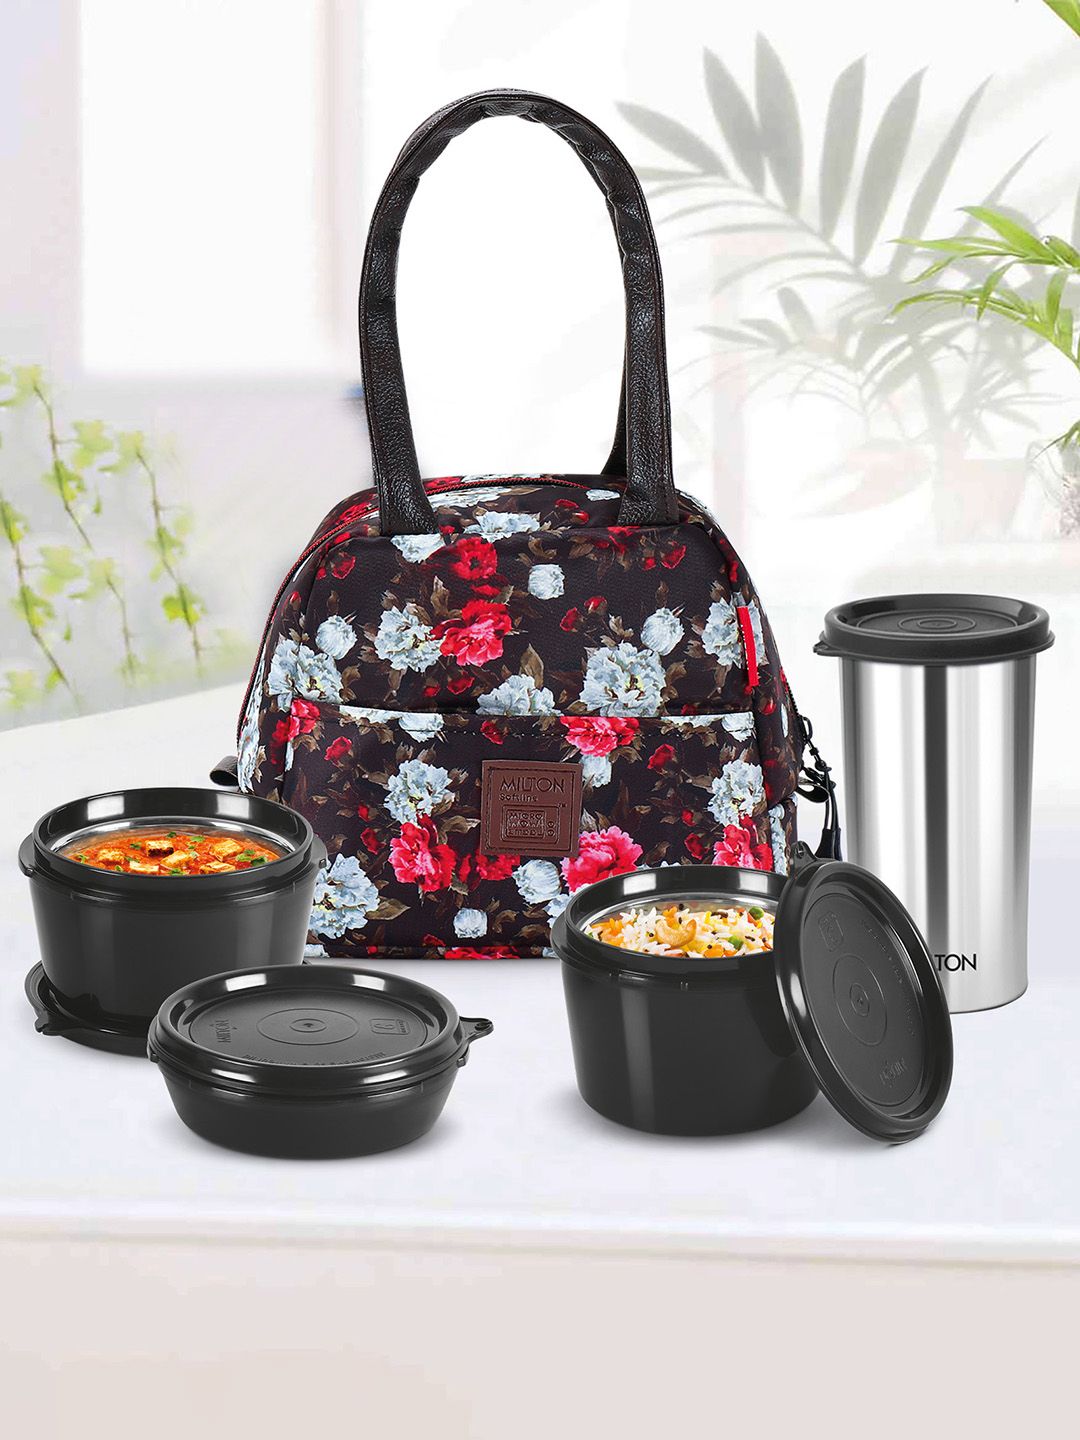 Milton Floret Tiffin 3 Inner Steel Container & Tumbler With Insulated Fabric Jacket Black